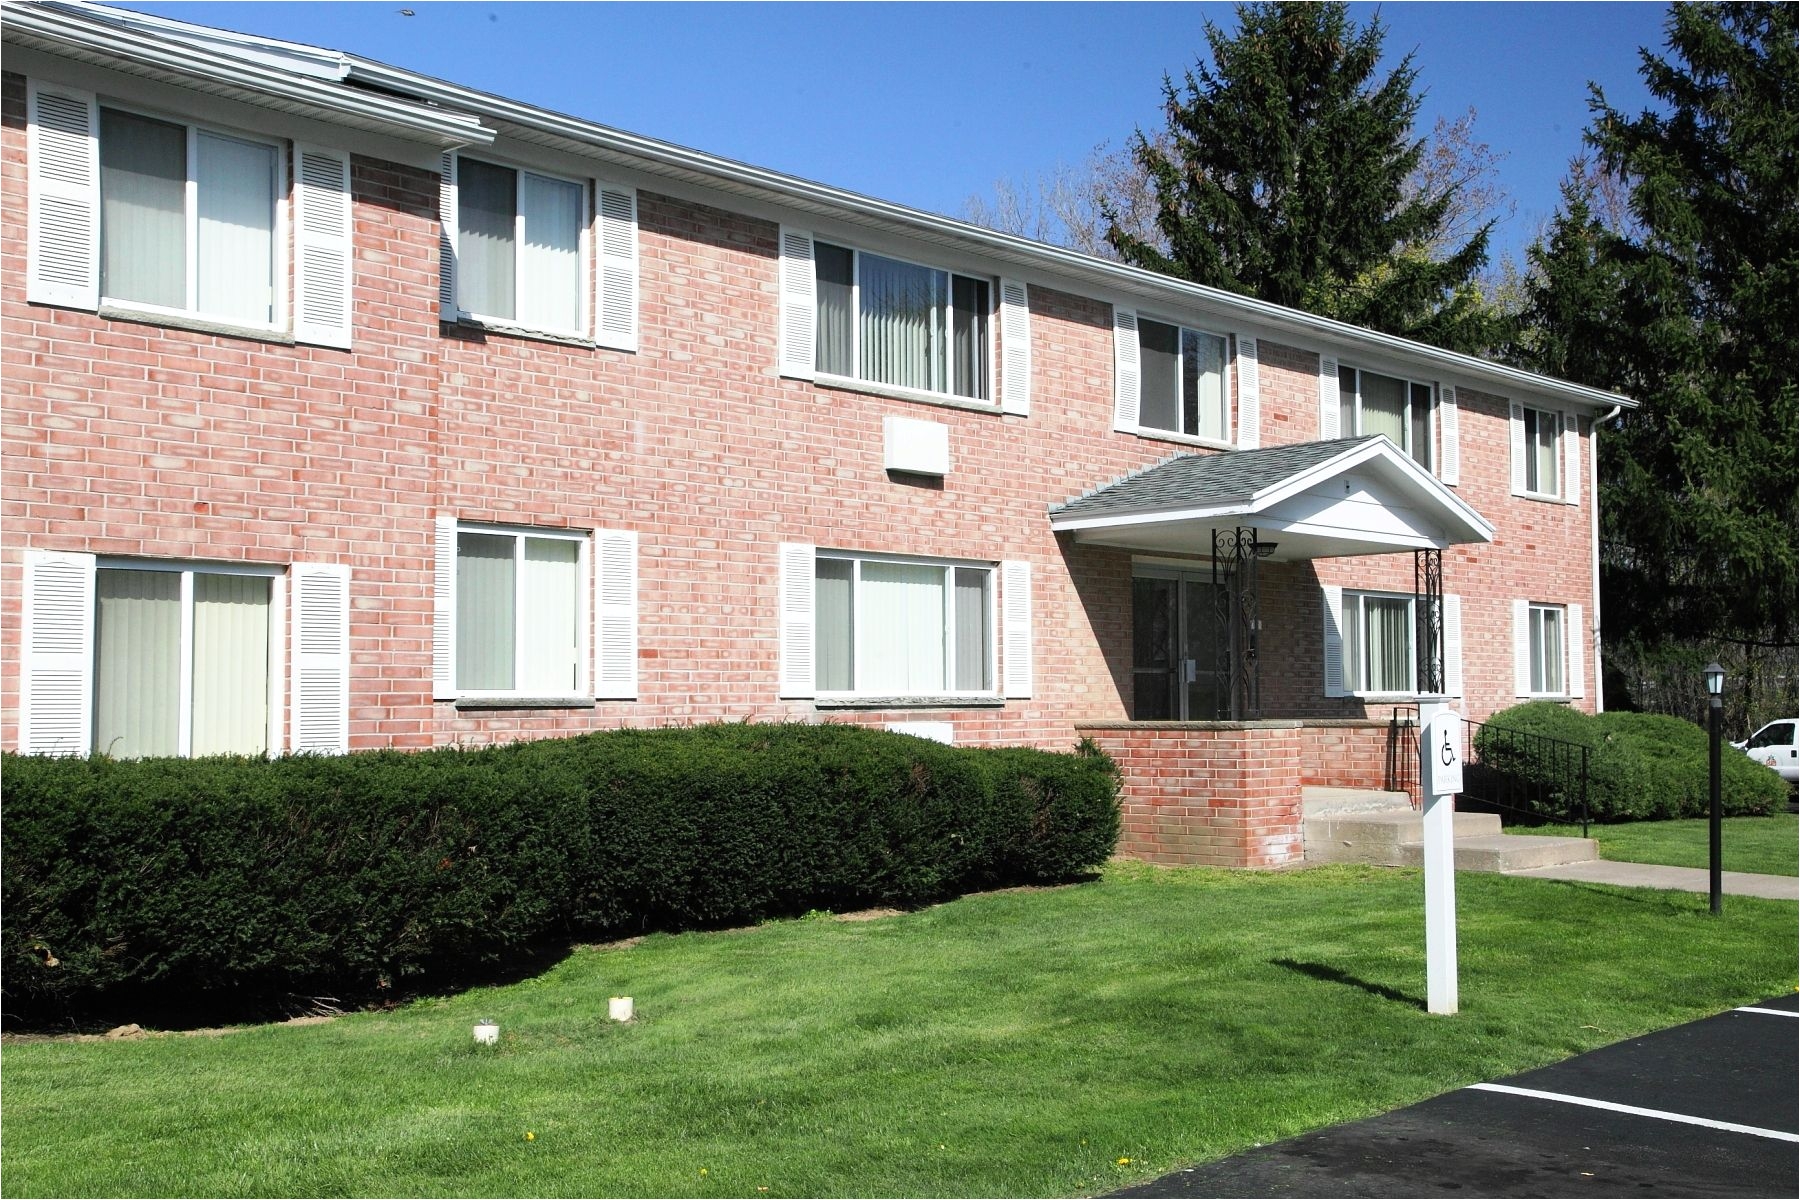 Homes for Sale In Webster Ny Country Manor Apartments In Webster Ny Exteriors and Grounds